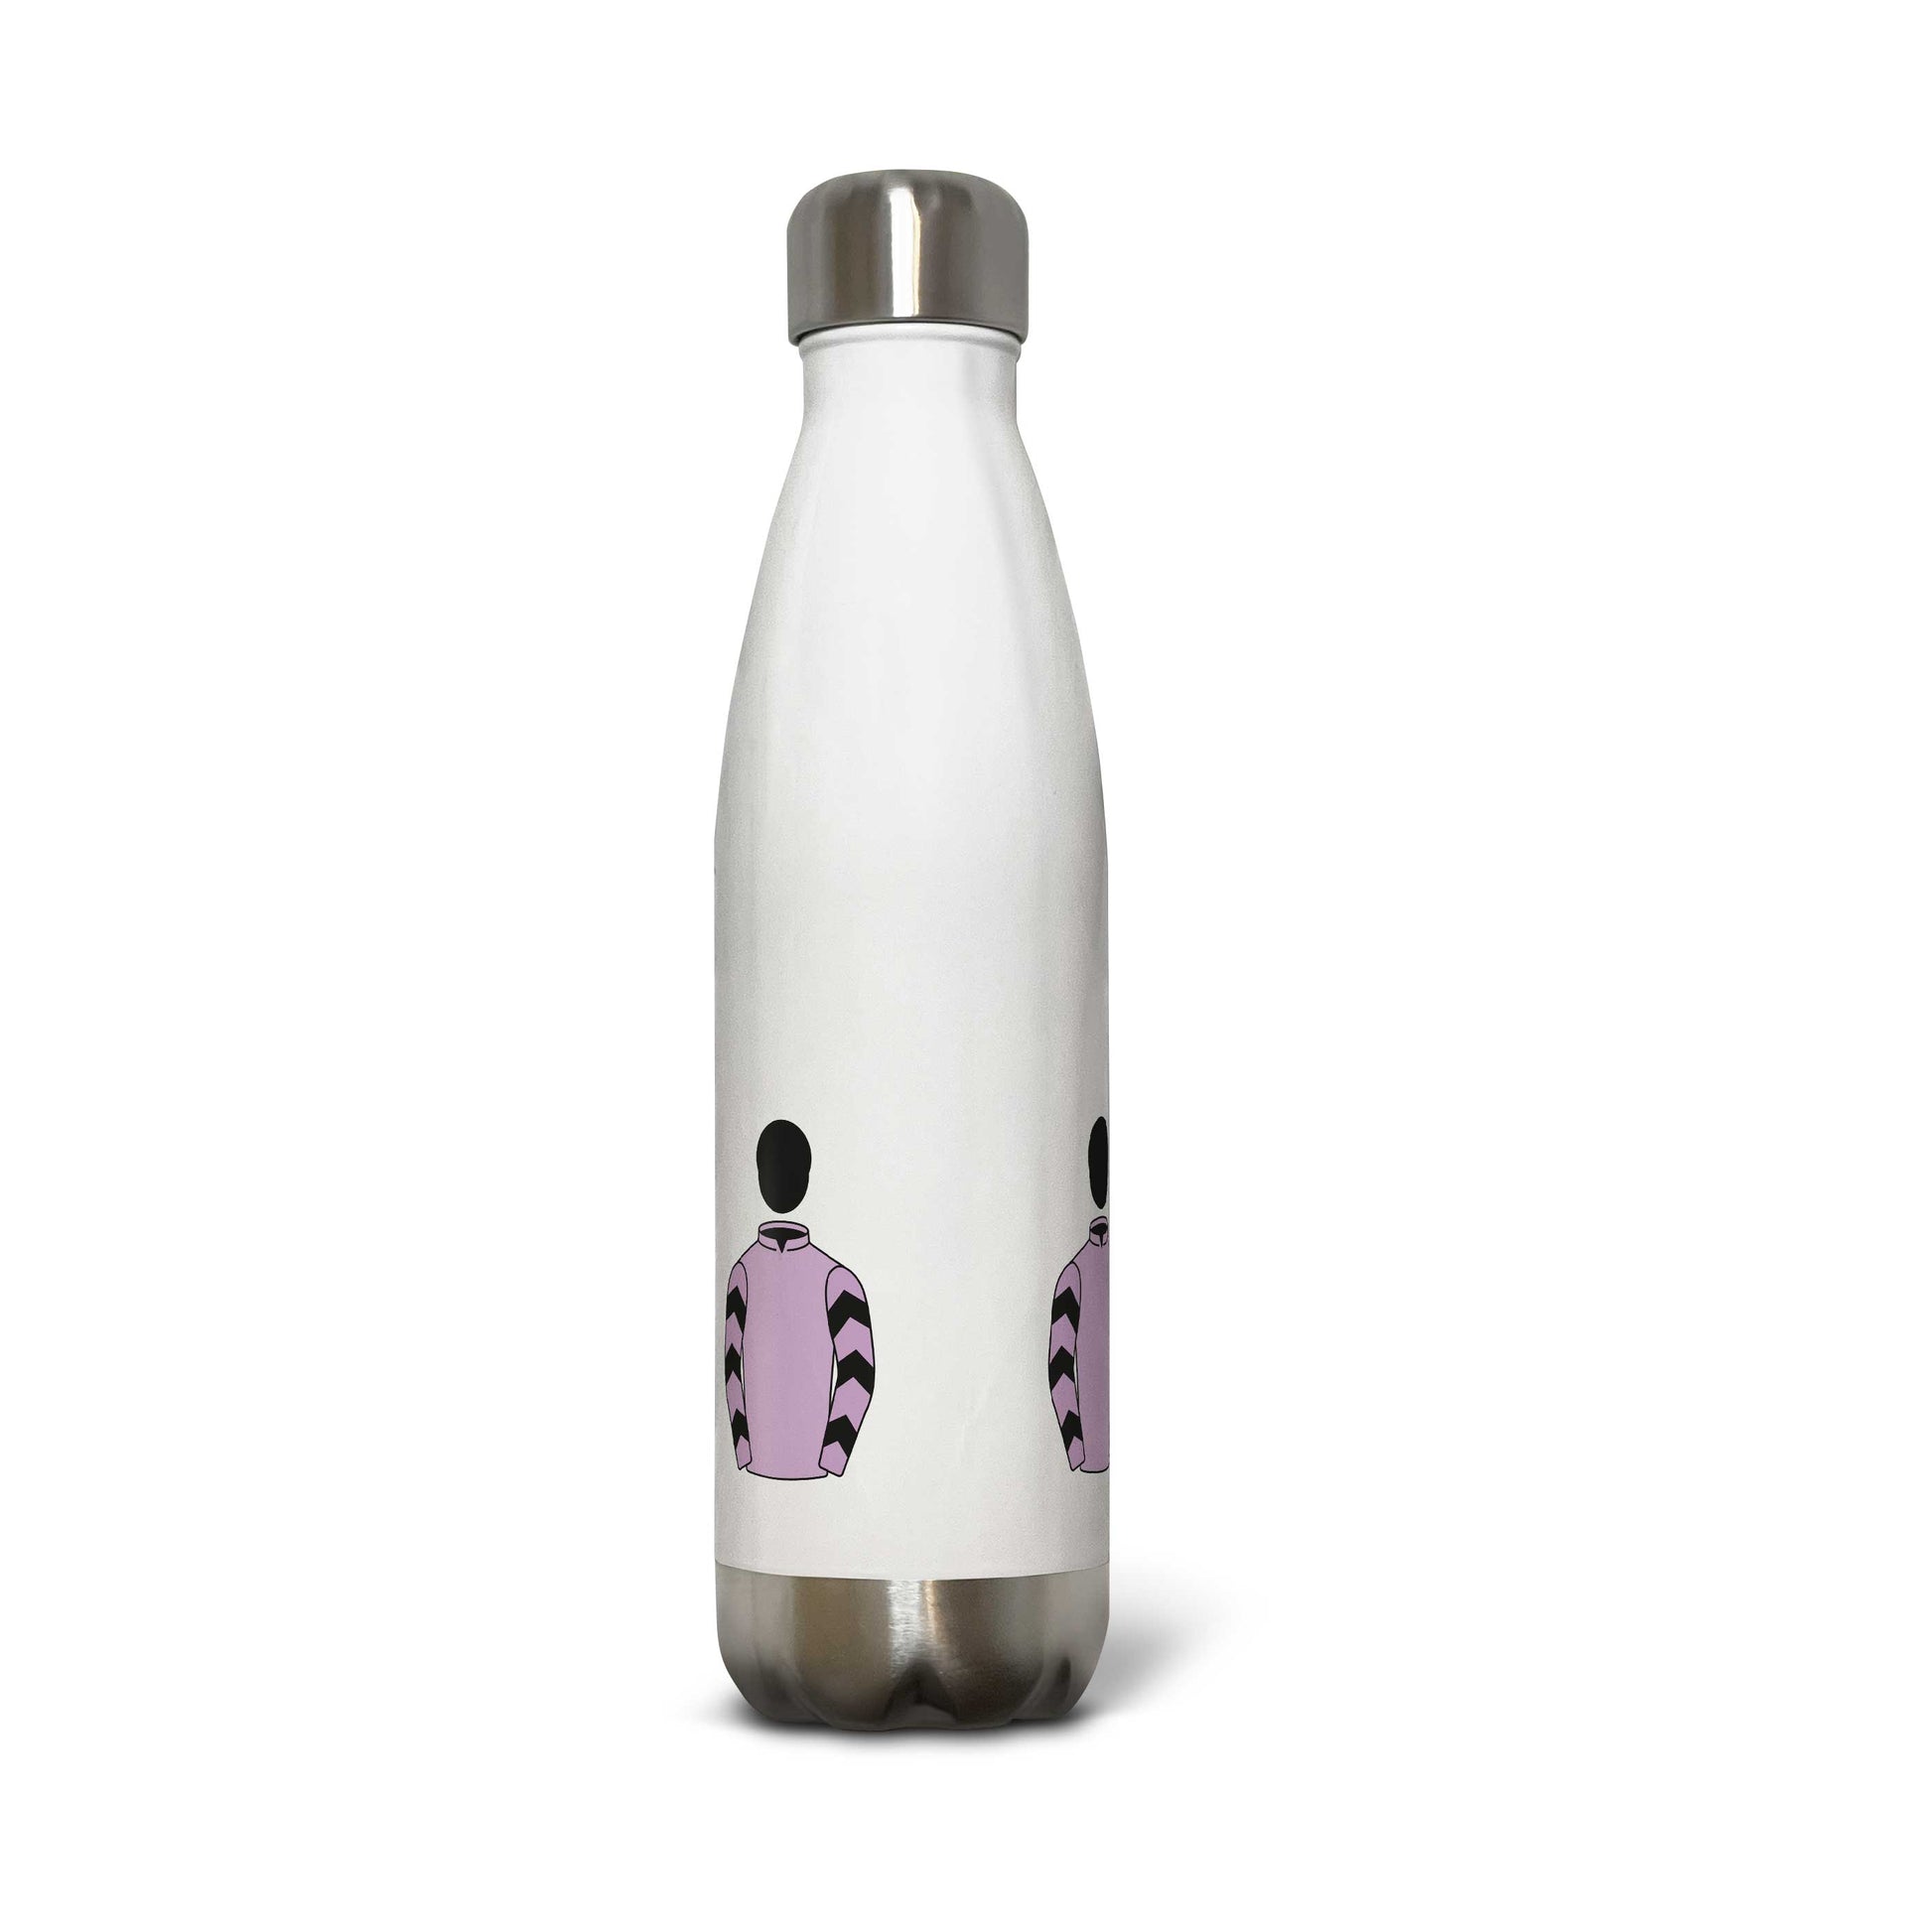 Owners Group Bowling Pin Bottle - Drinks Bottle - Hacked Up